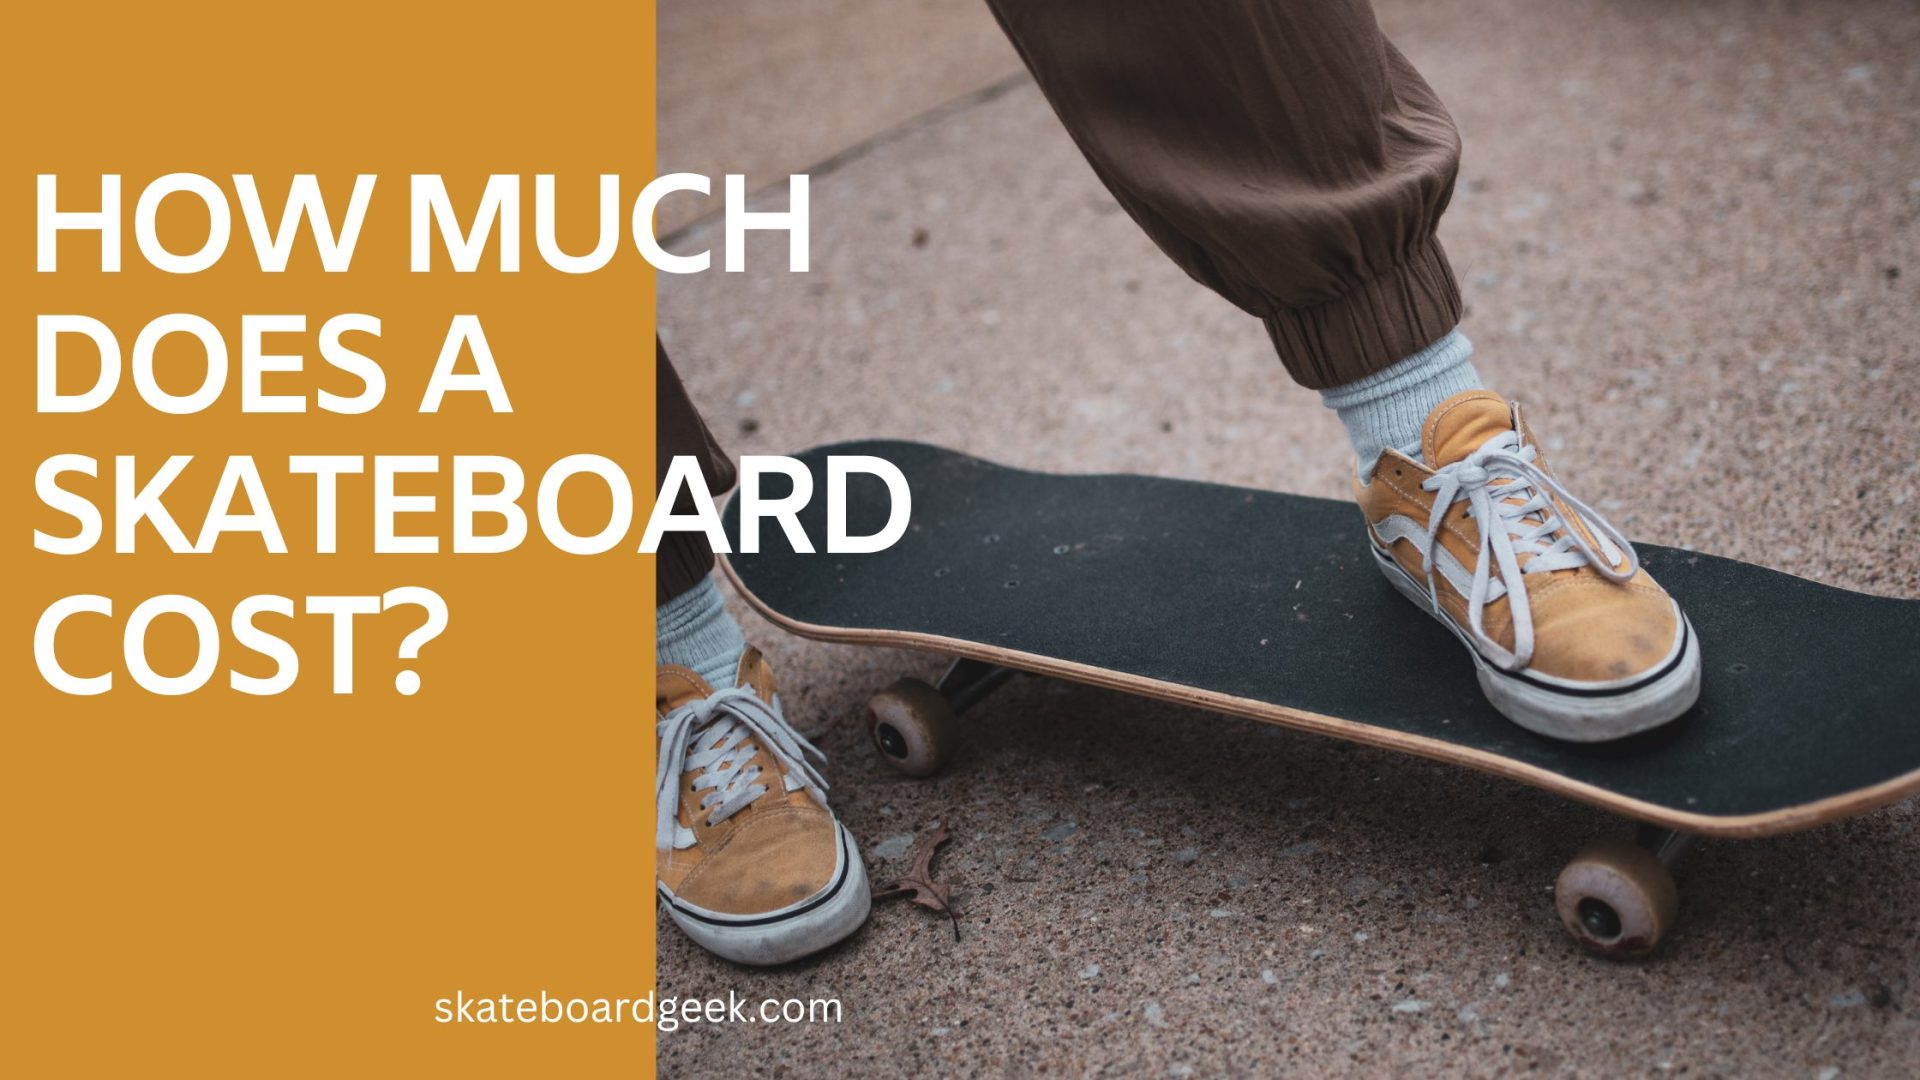 How Much Does A Skateboard Cost